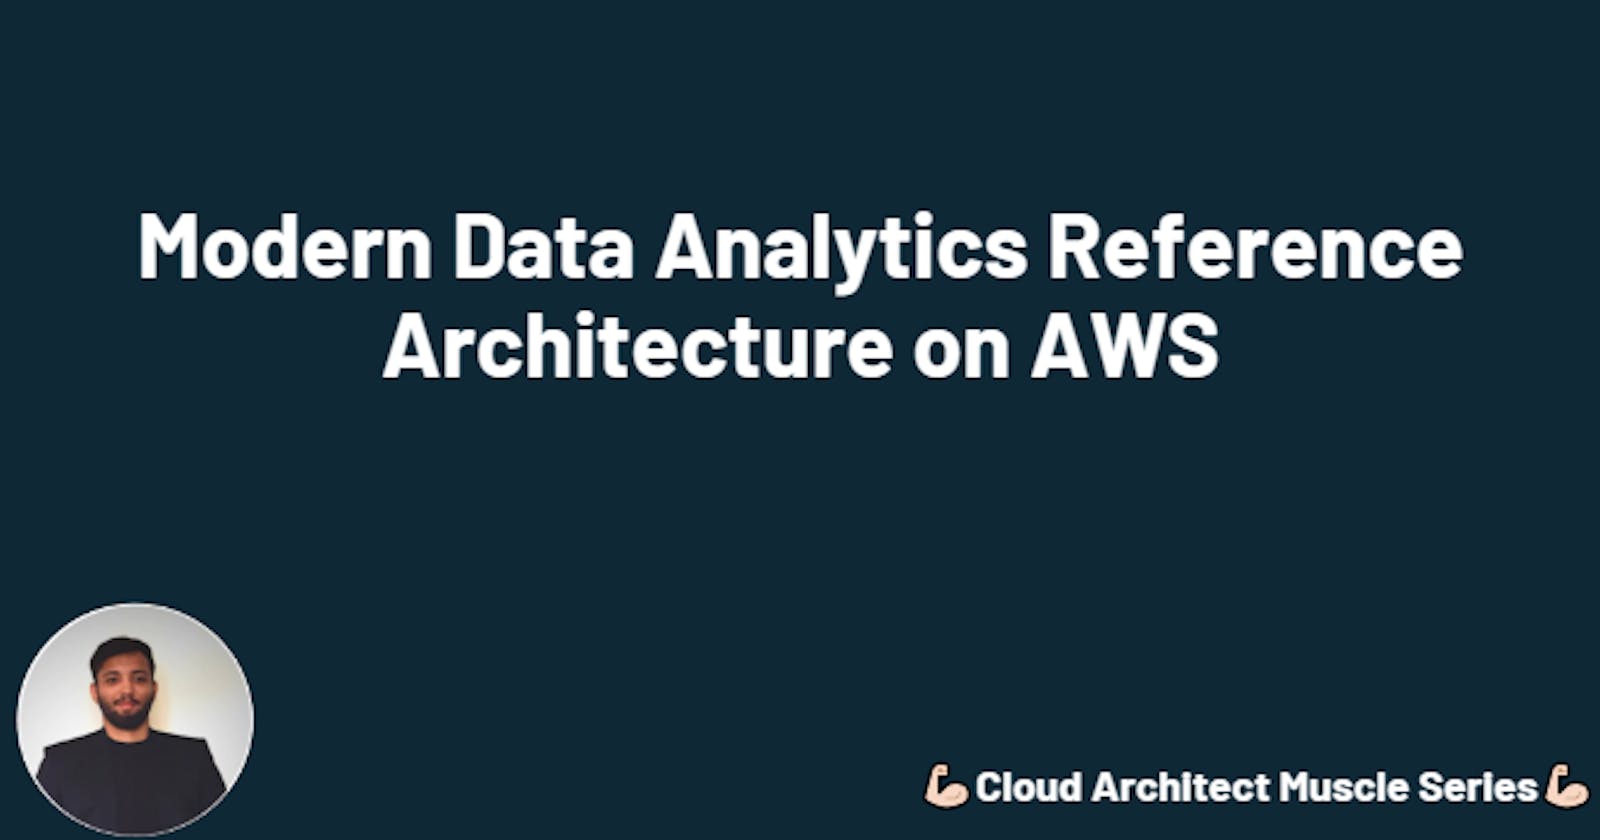 Modern Data Analytics Reference Architecture on AWS